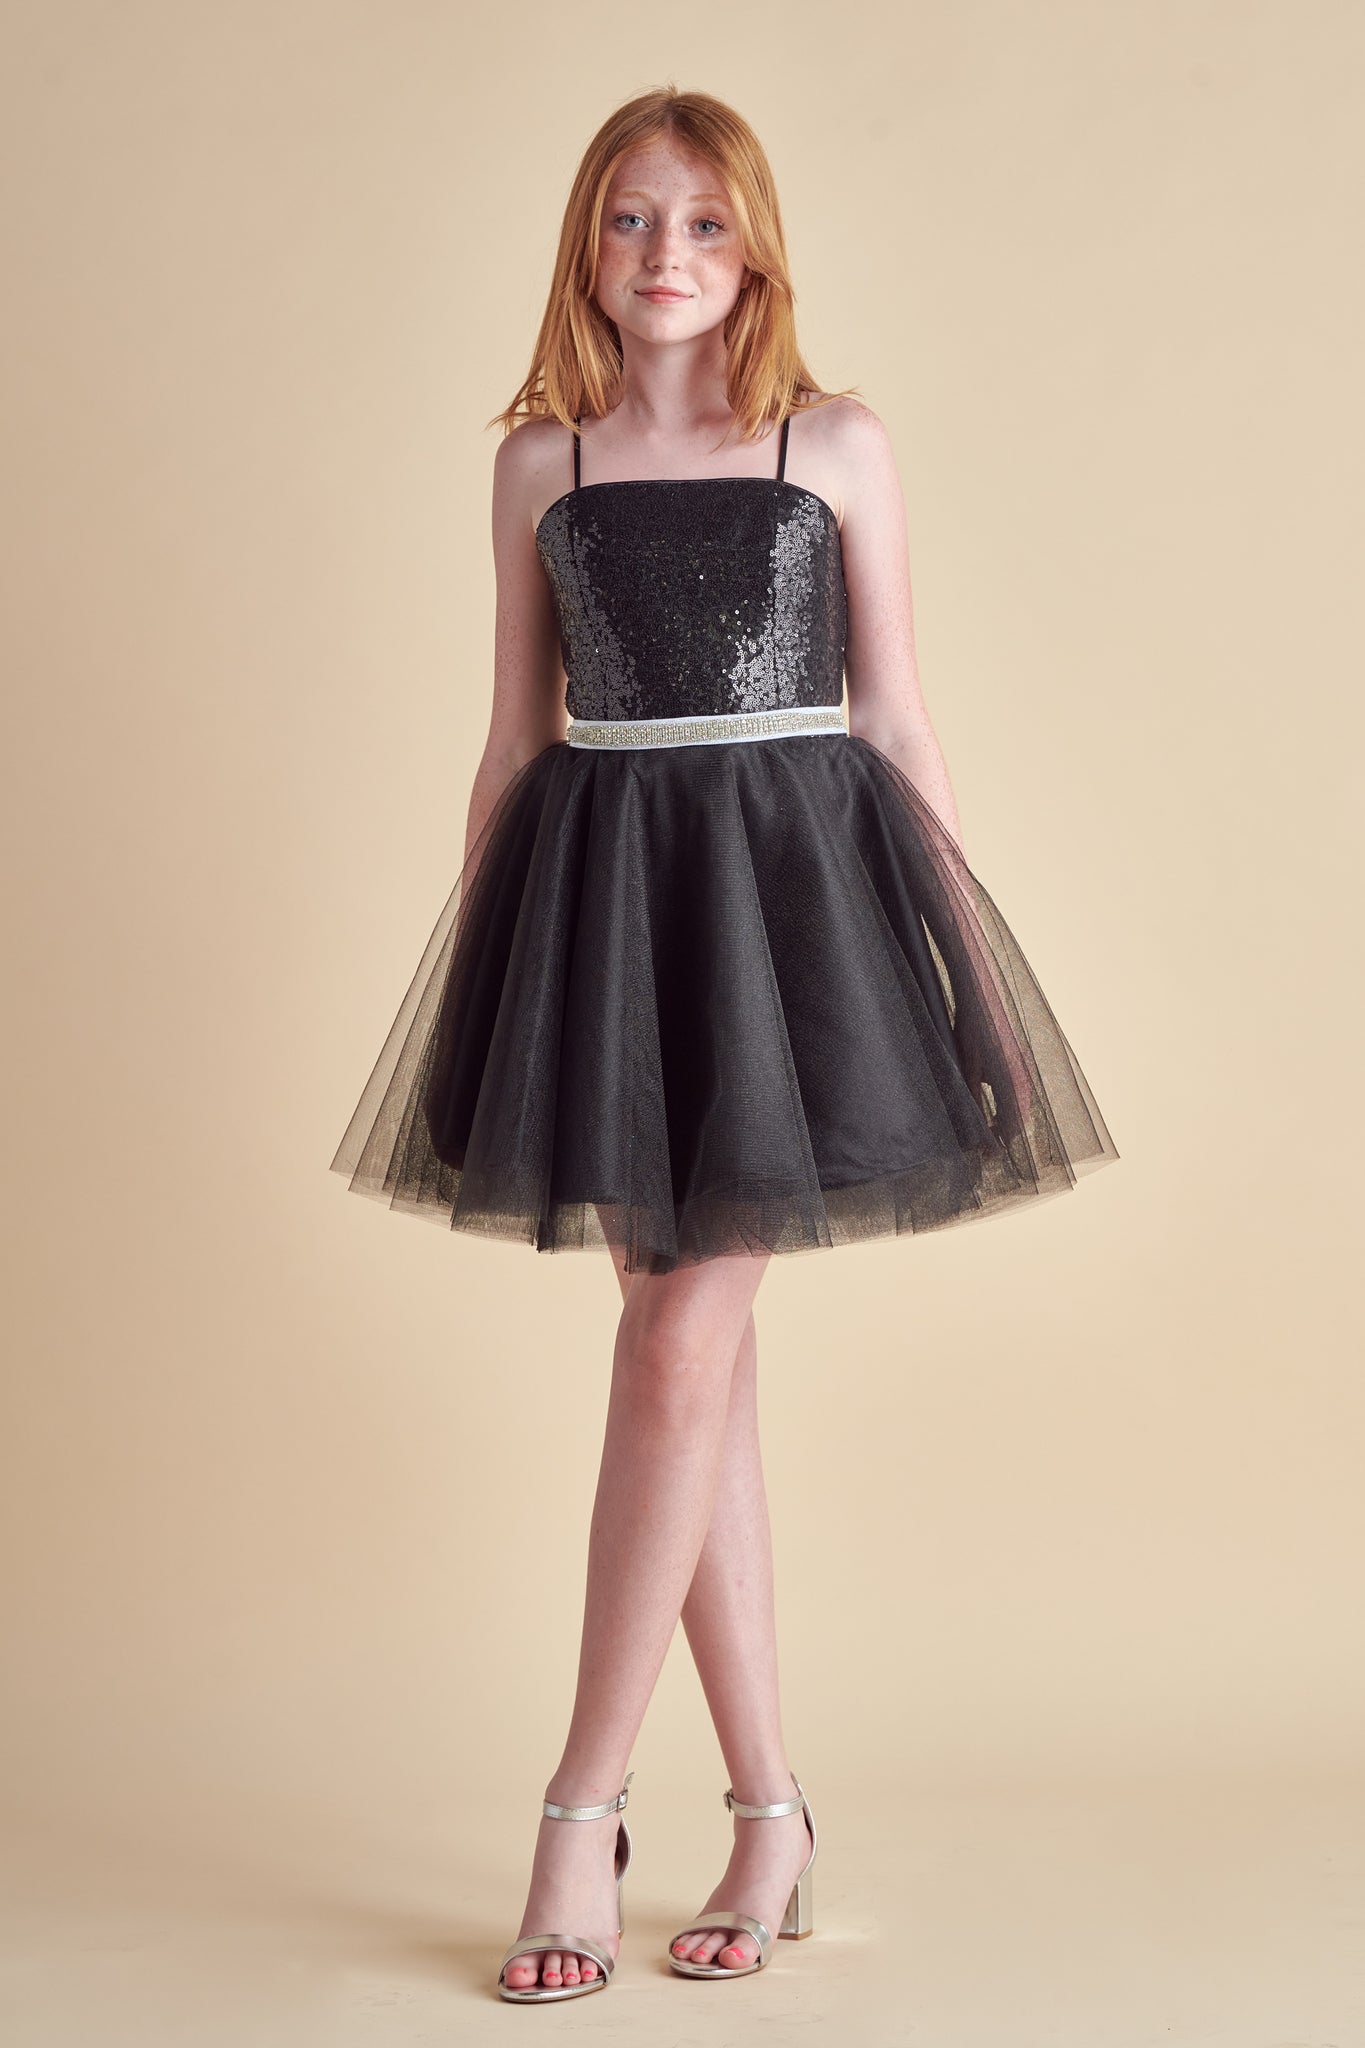 Ginger in a black tulle party dress